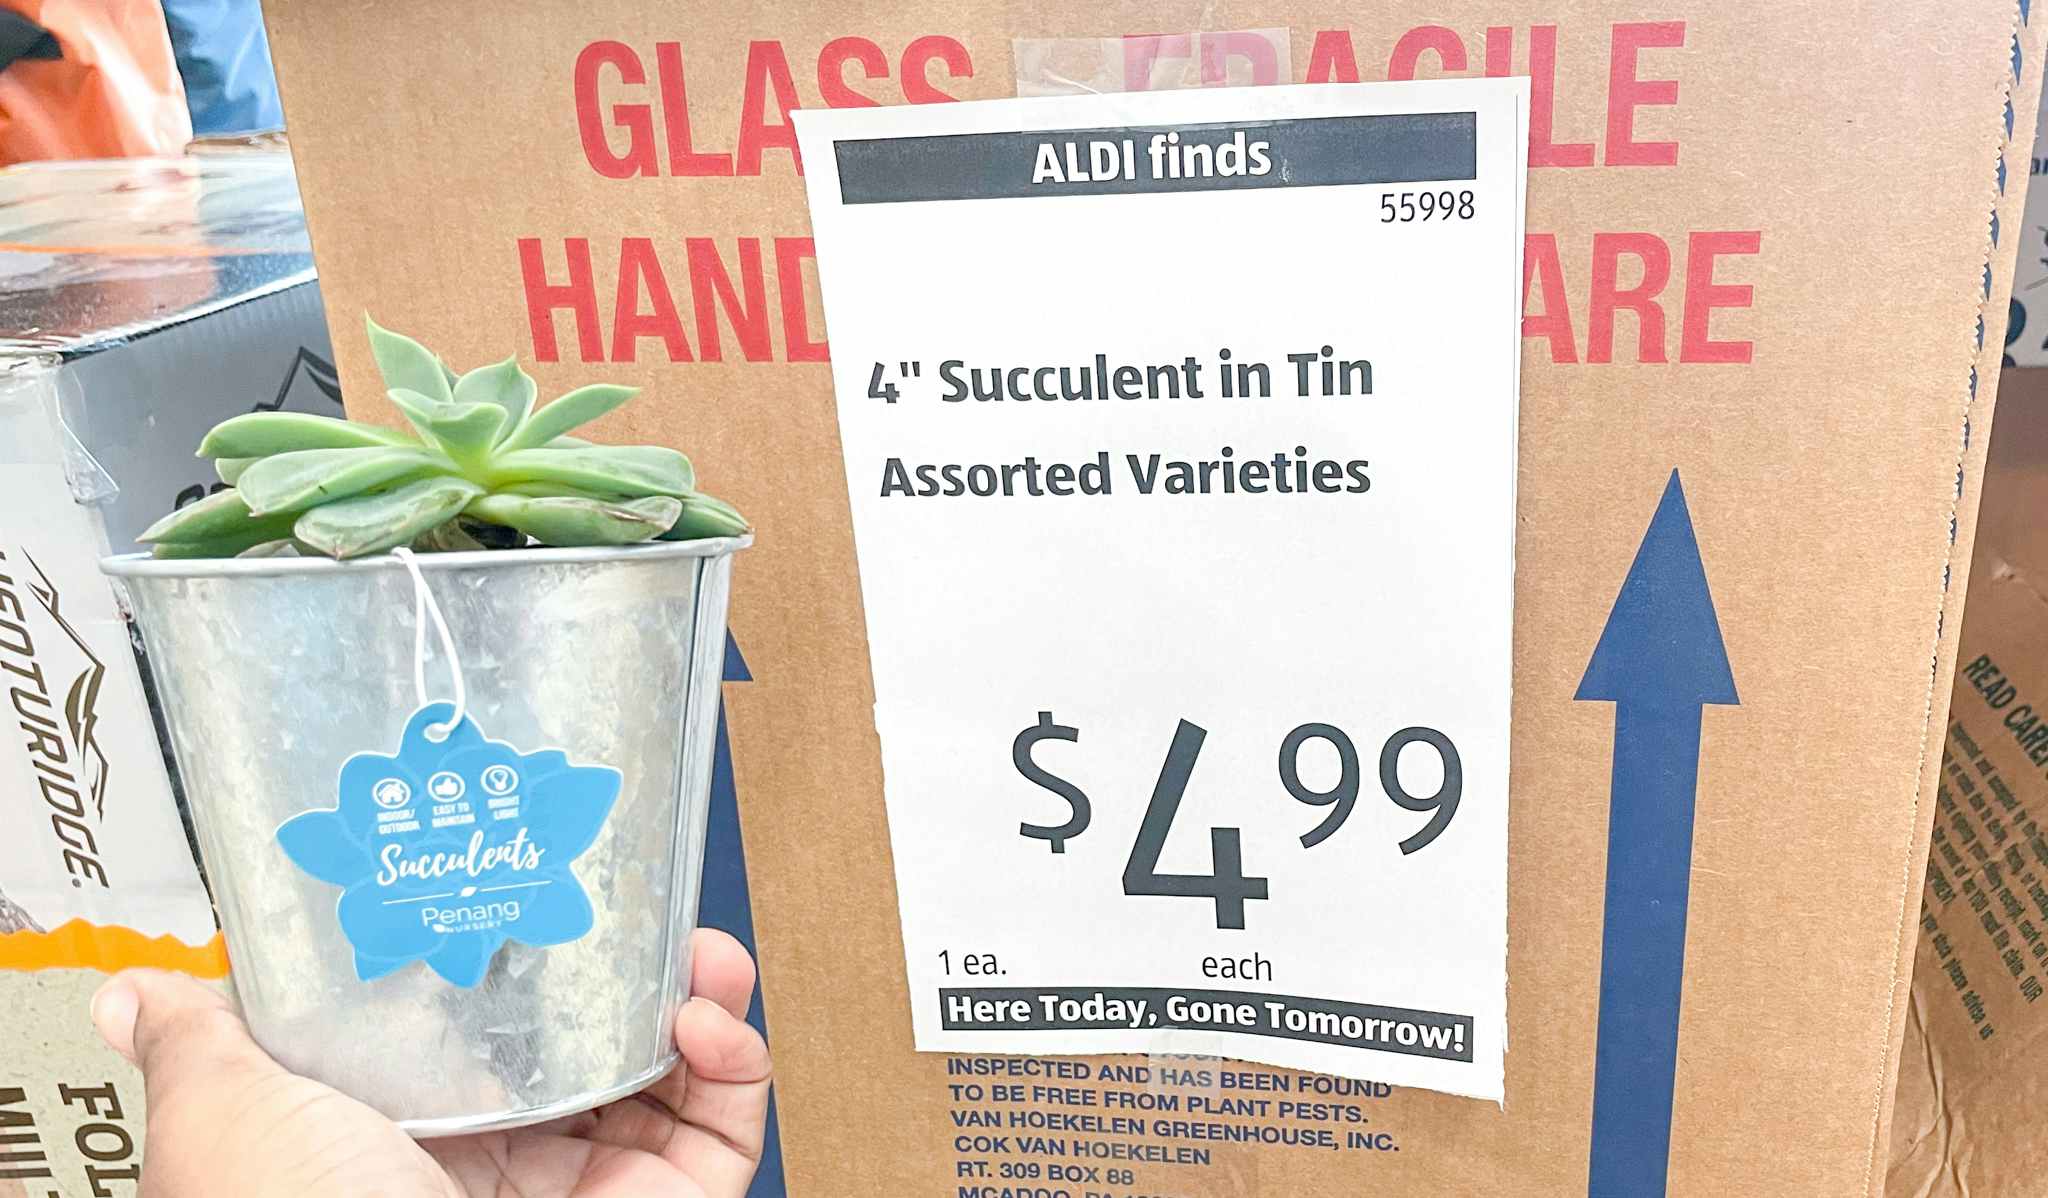 succulent in tin held in hand near sales sign